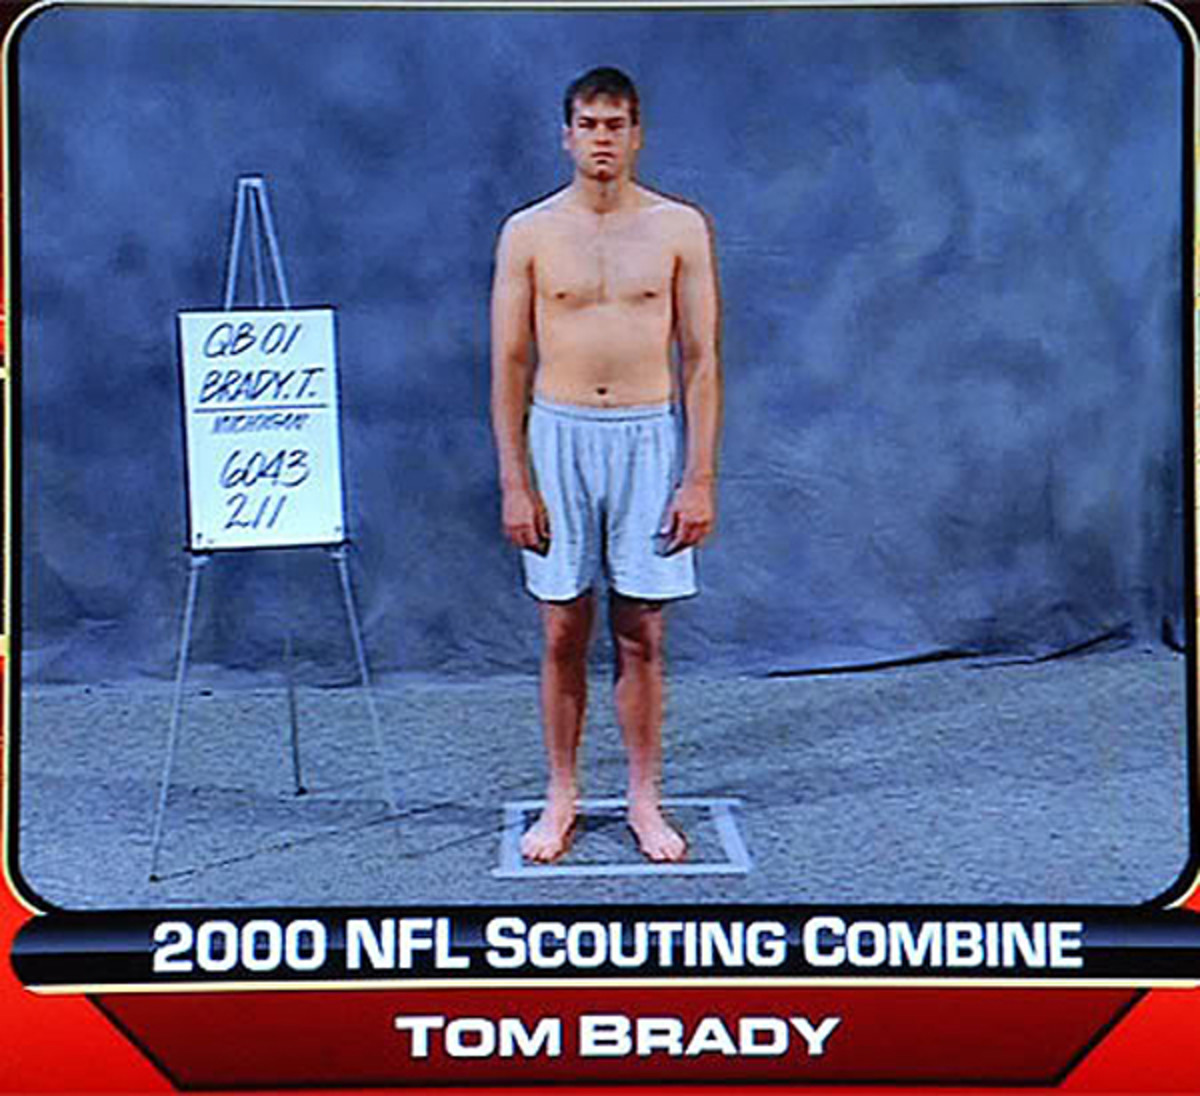 Heres A Pic Of Tom Brady Shirtless At The 2000 NFL Combine - Sports  Illustrated